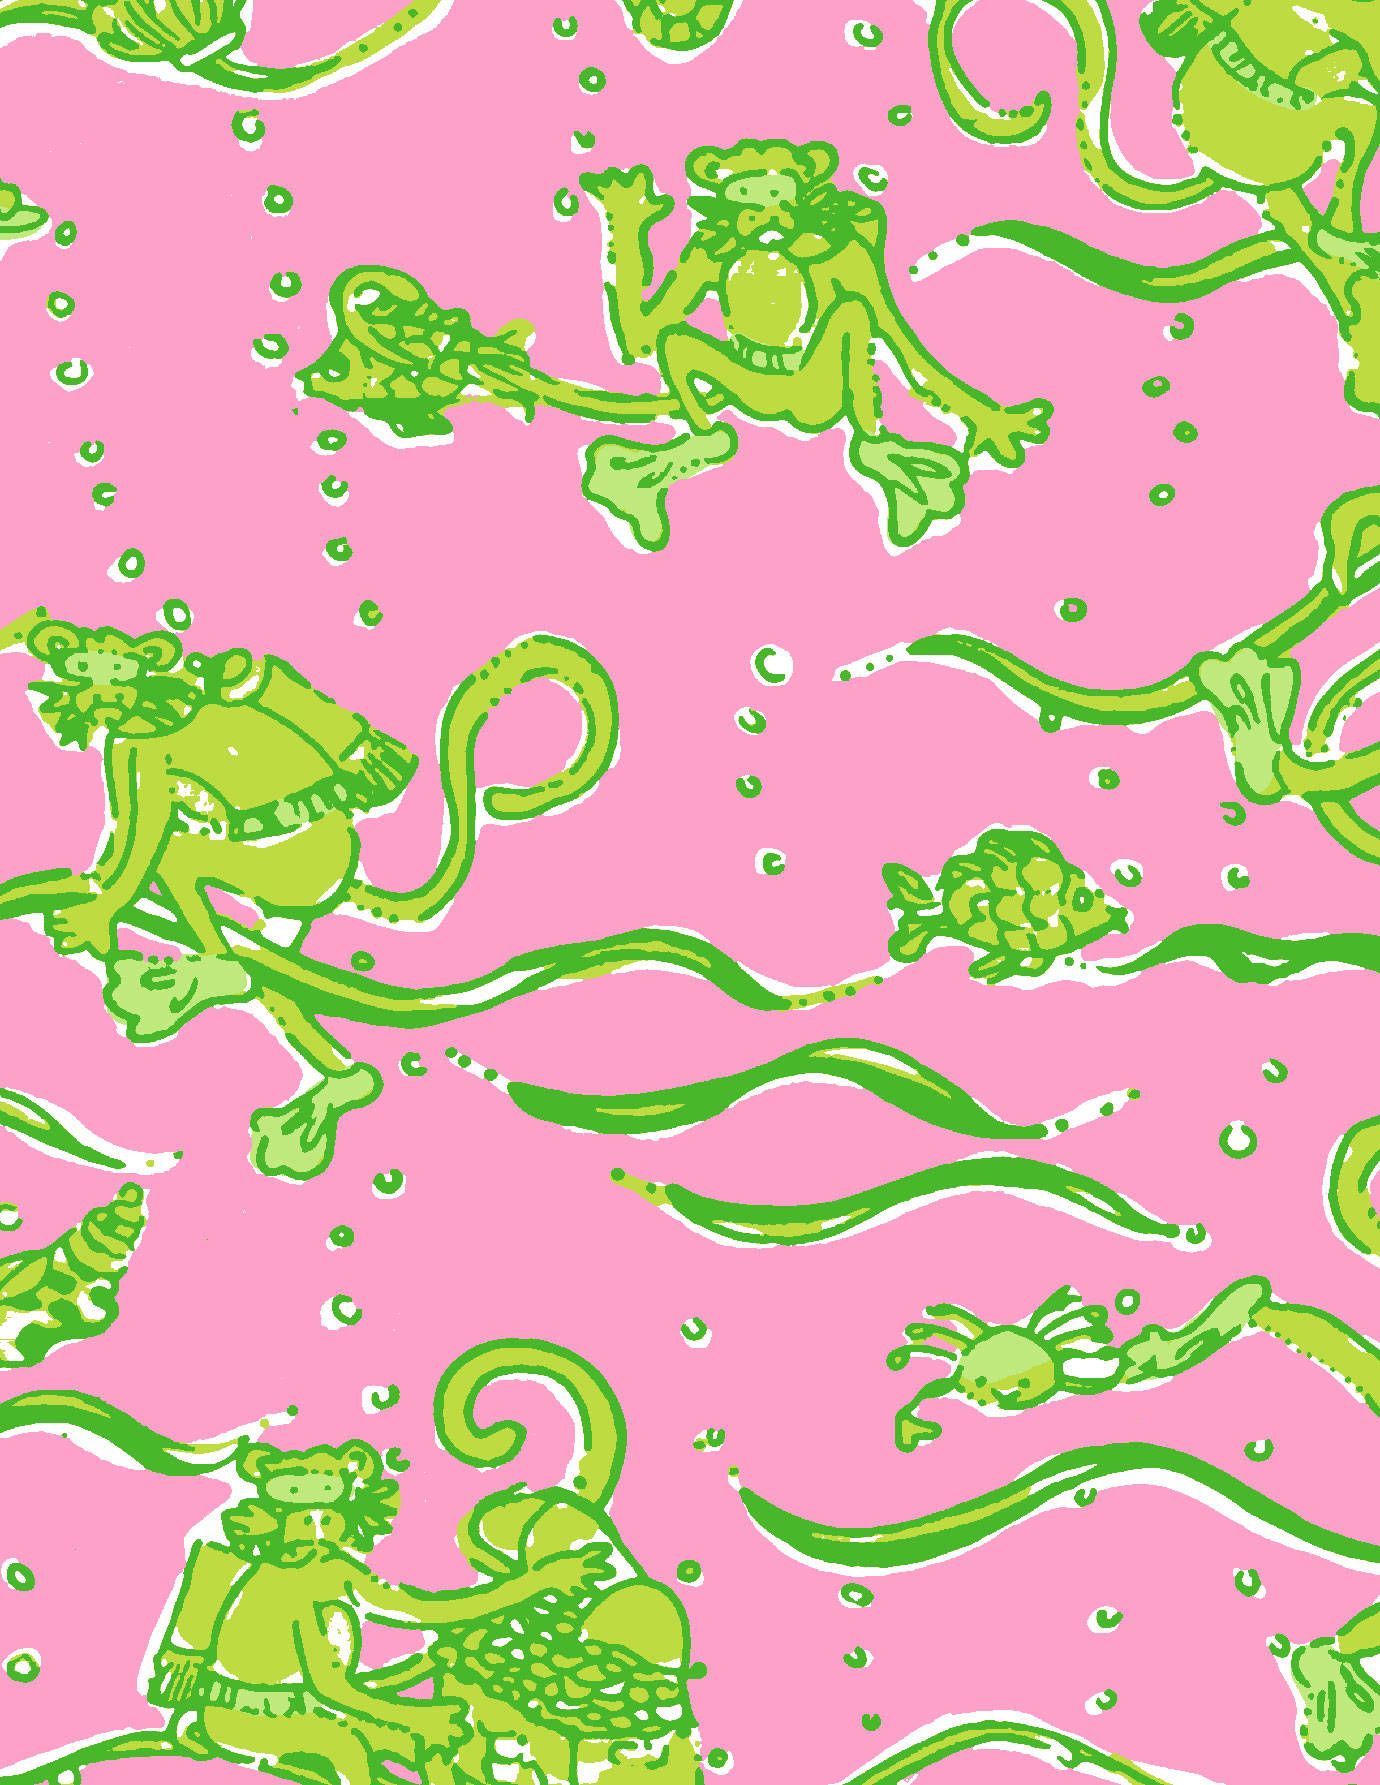 Lilly Pulitzer Prints - Most Popular Lilly Pulitzer Patterns